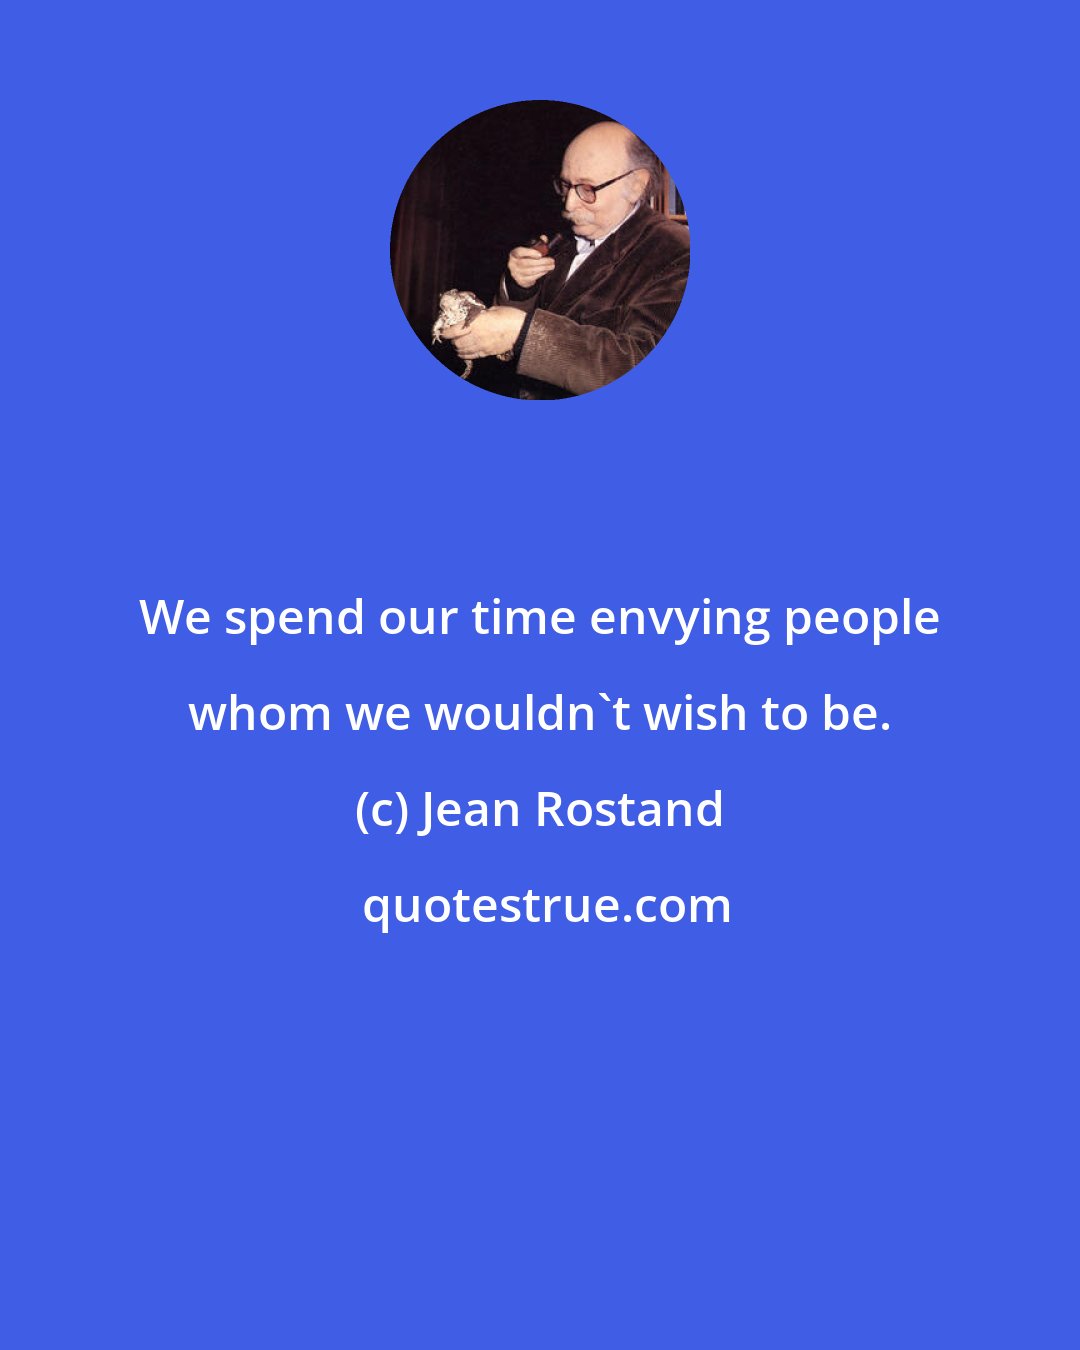 Jean Rostand: We spend our time envying people whom we wouldn't wish to be.